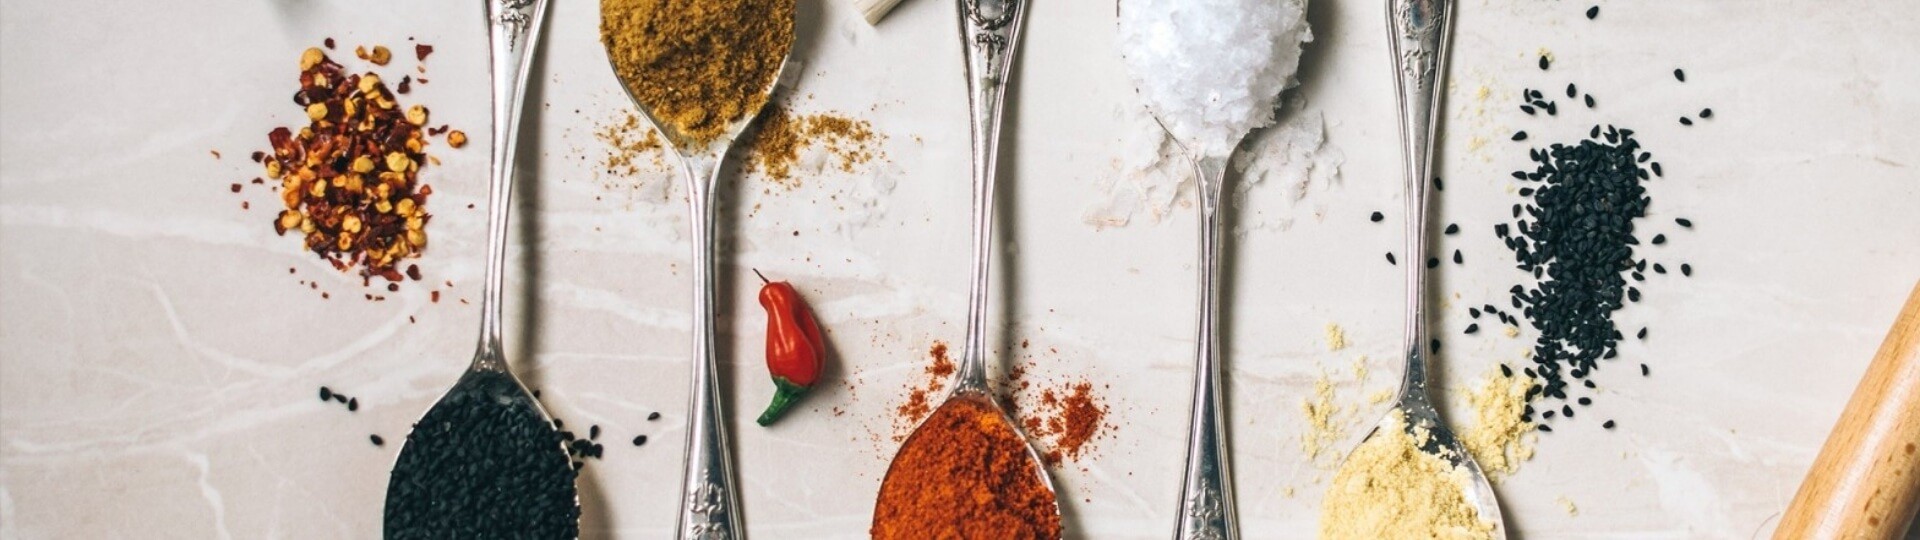 Salt, pepper, and spices